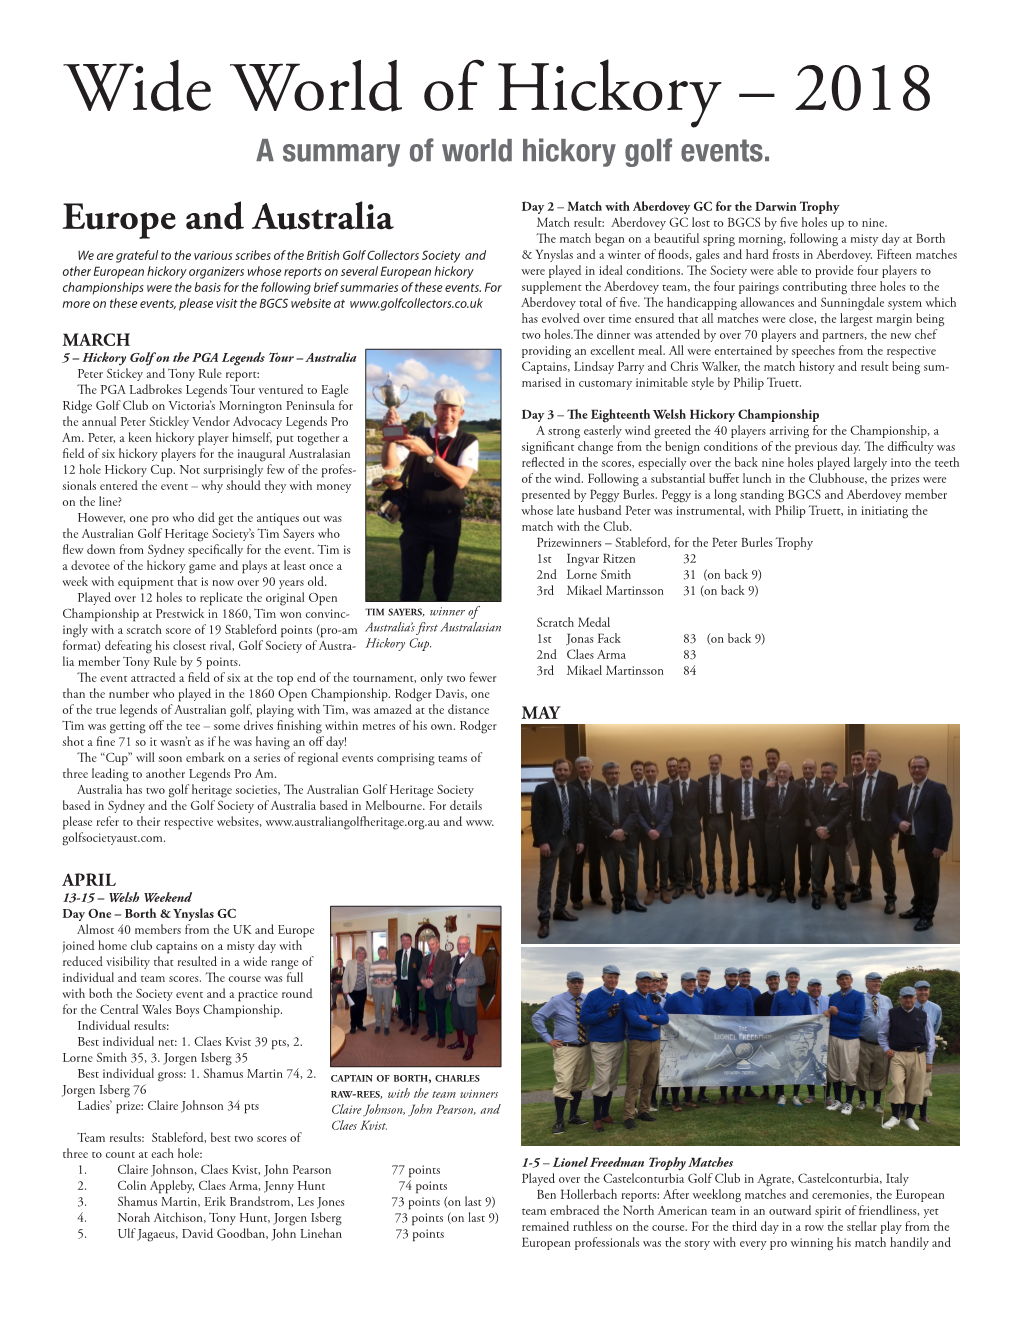 Wide World of Hickory – 2018 a Summary of World Hickory Golf Events